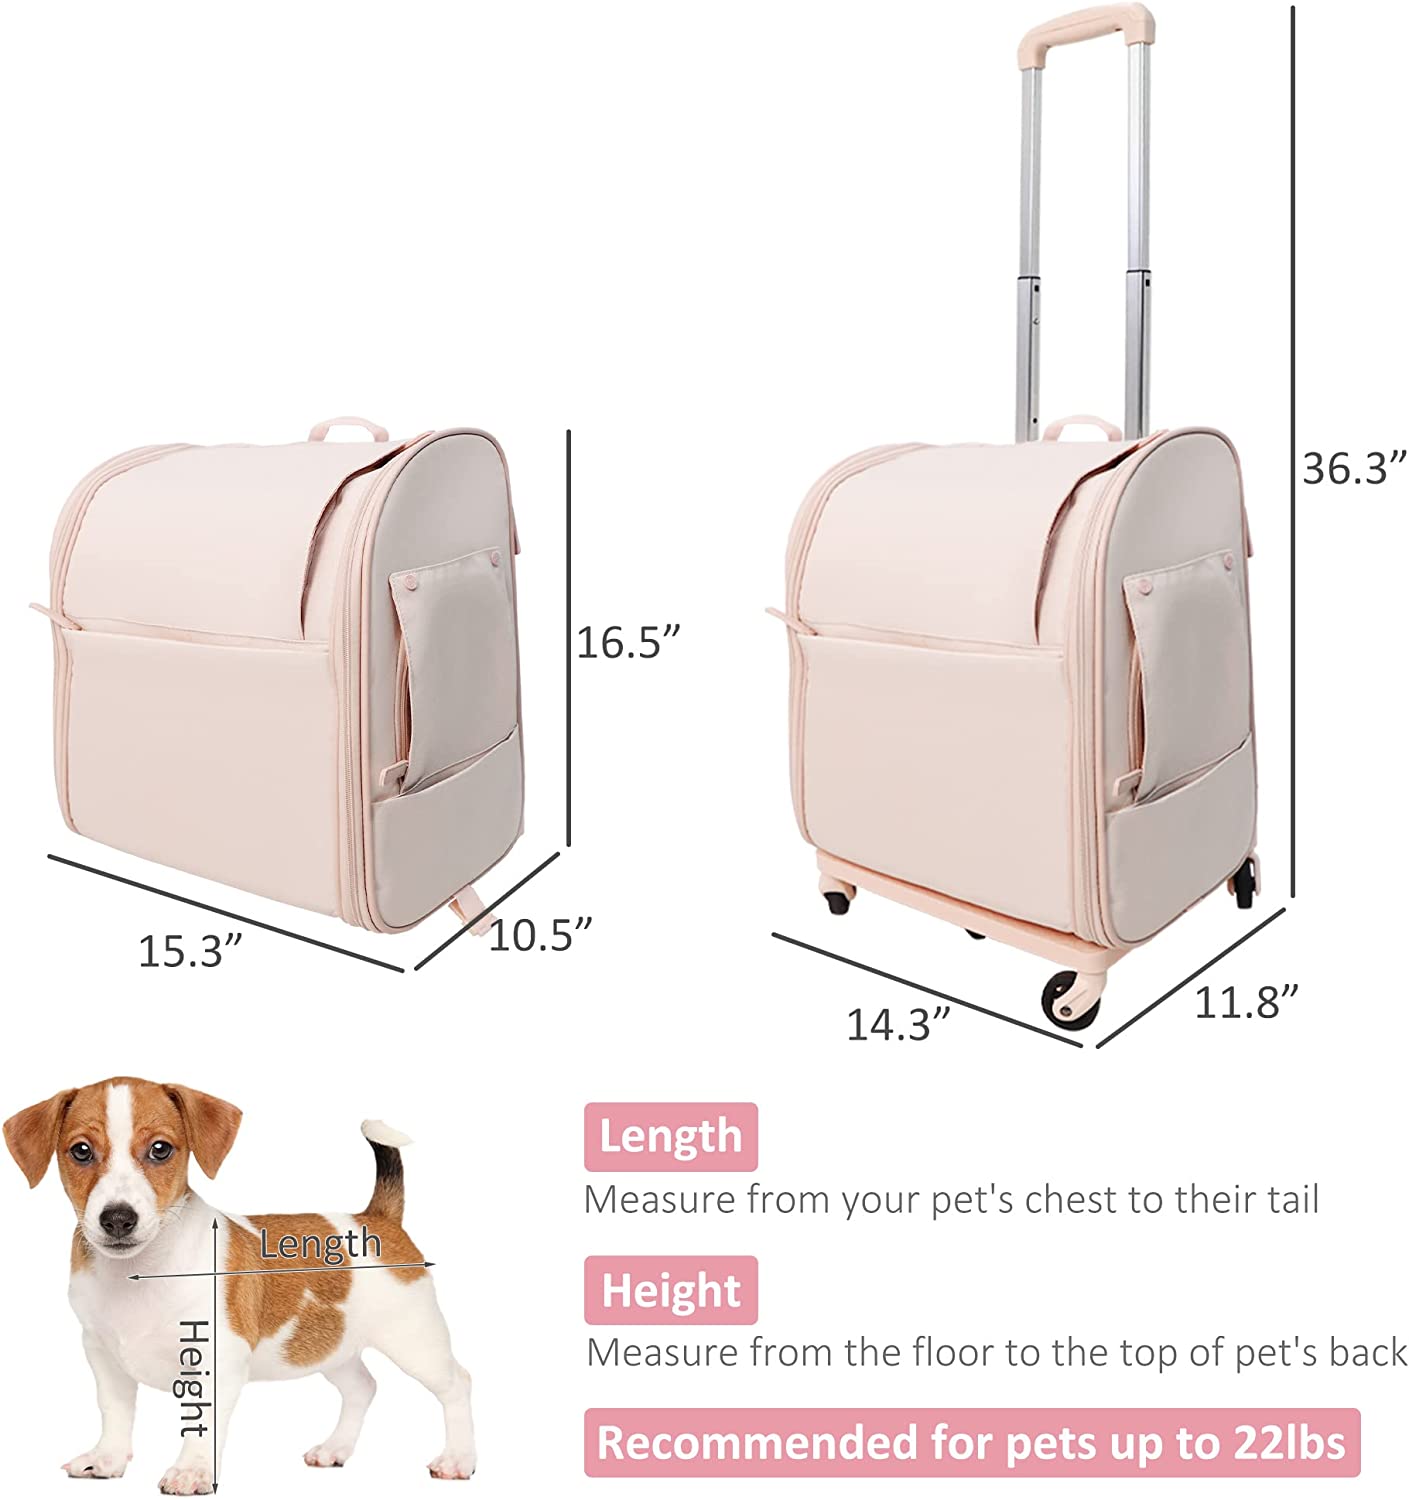 Cupets Pet Carrier with Wheels, Airline Approved Foldable Cat Carrier Backpack Bag, Pink